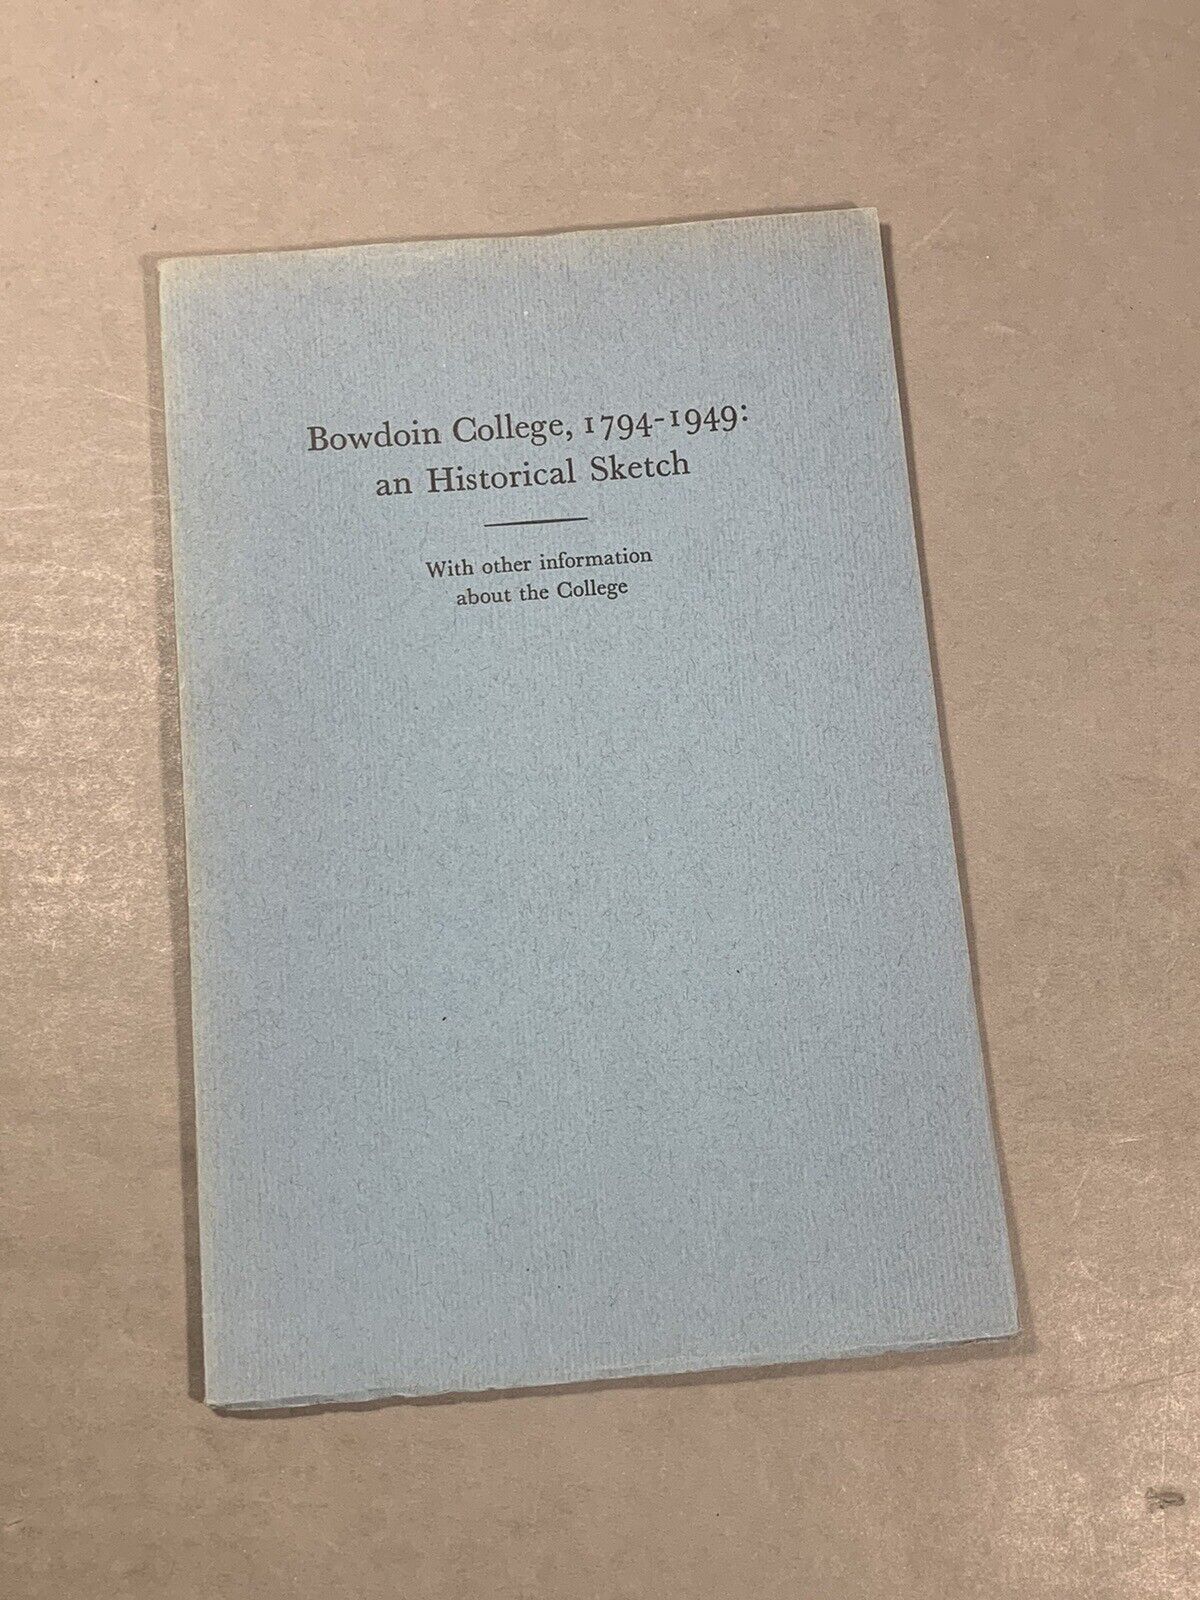 Bowdoin College 1794-1949 ~ an Historical Sketch and Information Booklet & Map